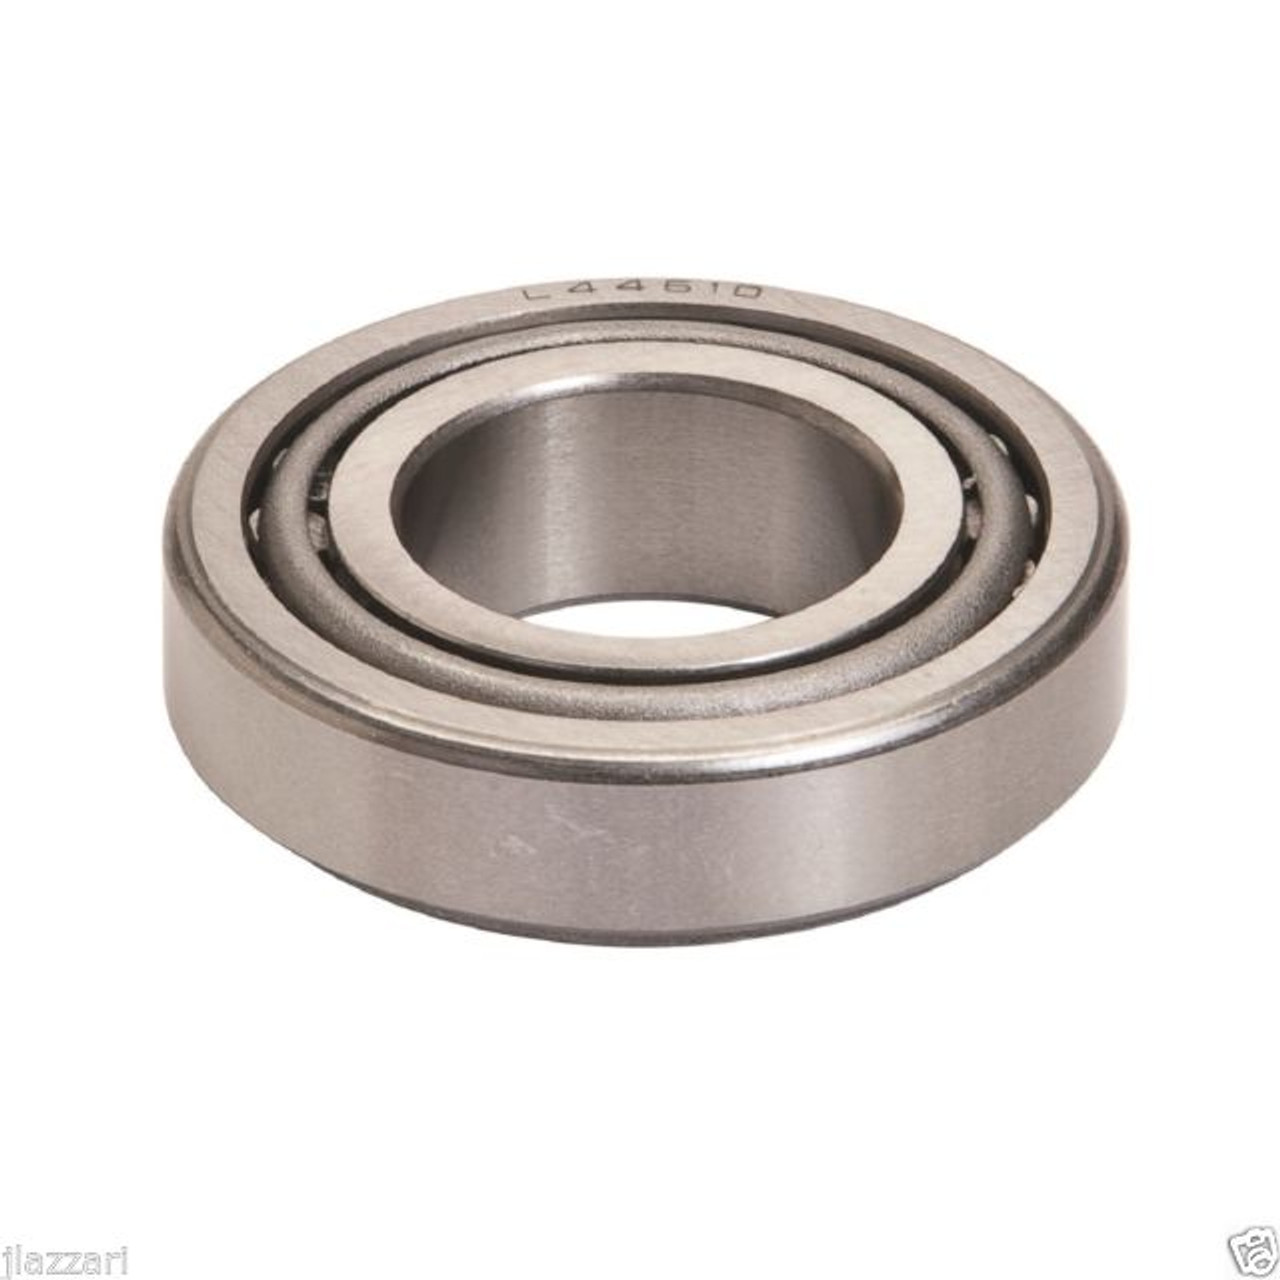 TORO 46-8530 Bearing Assembly
Where Used: Part Number 46-8530
Model Name Diagram
30108, Mid-Size Proline Gear Traction Unit, 8 hp, 1984 (SN 4000001-
4999999)
DRIVE SPINDLE NO. 51-3540
30111, Mid-Size Proline Gear Traction Unit, 11 hp, 1984 (SN 4000001-
4999999)
DRIVE SPINDLE NO. 51-3540
30111, Mid-Size Proline Gear Traction Unit, 11 hp, 1985 (SN 5000001-
5999999)
DRIVE SPINDLE N0. 54-7780 (CUTTING UNITS
MODEL NO. 30136 & 30152)
30111, Mid-Size Proline Gear Traction Unit, 11 hp, 1986 (SN 6000001-
6999999)
DRIVE SPINDLE NO. 27-0870 MODEL 30152
30111, Mid-Size Proline Gear Traction Unit, 11 hp, 1986 (SN 6000001-
6999999)
DRIVE SPINDLE NOS. 54-7780, 54-7781 MODELS
30136, 30152
30112, Mid-Size Proline Gear Traction Unit, 12.5 hp, 1986 (SN 6000001-
6999999)
DRIVE SPINDLE NO. 54-7780 MODEL 30136
30113, Mid-Size Proline Gear Traction Unit, 8 hp, 1985 (SN 5000001-
5999999)
DRIVE SPINDLE NO. 54-7780 (CUTTING UNITS
MODEL NO. 30136 & 30152)
30113, Mid-Size Proline Gear Traction Unit, 8 hp, 1986 (SN 6000001-
6999999)
DRIVE SPINDLE NO. 54-7780 MODEL 30136
30116, Mid-Size Proline Gear Traction Unit, 16 hp, 1986 (SN 6000001-
6999999)
DRIVE SPINDLE NO. 27-0870 MODEL 30152
30116, Mid-Size Proline Gear Traction Unit, 16 hp, 1986 (SN 6000001-
6999999)
DRIVE SPINDLE NO. 54-7780, 54-7781 MODEL
30136, 30152
30125, 36" Soft Bag (5 bu.) for Floating Mid-Size Mowers, 1985 (SN
5000001-5999999)
DRIVE SPINDLE NO. 54-7780 (CUTTING UNITS
MODEL NO. 30136 & 30152)
30125, 36" Soft Bag (5 bu.) for Floating Mid-Size Mowers, 1986 (SN
6000001-6999999)
DRIVE SPINDLE NO. 54-7780 (CUTTING UNITS
MODEL NO. 30136 & 30152)
30136, 36" Side Discharge Mower, 1984 (SN 4000001-4999999) DRIVE SPINDLE NO. 51-3540
30136, 36" Side Discharge Mower, 1985 (SN 5000001-5999999) DRIVE SPINDLE NO. 54-7780 (CUTTING UNITS
MODEL NO. 30136 & 30152)
30136, 36" Side Discharge Mower, 1986 (SN 6000001-6000797) DRIVE SPINDLE NO. 54-7780 (CUTTING UNITS
MODEL NO. 30136 & 30152)
30136, 36" Side Discharge Mower, 1987 (SN 7000001-7999999) DRIVE SPINDLE NO. 27-0870
30136, 36" Side Discharge Mower, 1987 (SN 7000001-7999999) DRIVE SPINDLE NO. 54-7781
30136, 36" Side Discharge Mower, 1988 (SN 8000001-8999999) DRIVE SPINDLE NO. 27-0870
30136, 36" Side Discharge Mower, 1988 (SN 8000001-8999999) DRIVE SPINDLE NO. 54-7781
30136, 36" Side Discharge Mower, 1989 (SN 9000001-9999999) DRIVE SPINDLE NO. 27-0870
30136, 36" Side Discharge Mower, 1989 (SN 9000001-9999999) DRIVE SPINDLE NO. 54-7781
30136, 36" Side Discharge Mower, 1990 (SN 0000001-0999999) DRIVE SPINDLE NO. 27-0870
30136, 36" Side Discharge Mower, 1990 (SN 0000001-0999999) DRIVE SPINDLE NO. 54-7781
30136, 36" Side Discharge Mower, 1991 (SN 1000001-1999999) DRIVE SPINDLE NO. 27-0870
30136, 36" Side Discharge Mower, 1991 (SN 1000001-1999999) DRIVE SPINDLE NO. 54-7781
30136, 36" Side Discharge Mower, 1992 (SN 2000001-2999999) DRIVE SPINDLE NO. 27-0870
30136, 36" Side Discharge Mower, 1992 (SN 2000001-2999999) DRIVE SPINDLE NO. 54-7781
30136, 36" Side Discharge Mower, 1993 (SN 3900001-3999999) DRIVE SPINDLE NO. 27-0870
30136, 36" Side Discharge Mower, 1993 (SN 3900001-3999999) DRIVE SPINDLE NO. 54-7781
30136, 36" Side Discharge Mower, 1994 (SN 4900001-4901036) DRIVE SPINDLE NO. 27-0870
30136, 36" Side Discharge Mower, 1994 (SN 4900001-4901036) DRIVE SPINDLE NO. 54-7781
30136, 36" Side Discharge Mower, 1994 (SN 4901037-4999999) DRIVE SPINDLE NO. 27-0870
30136, 36" Side Discharge Mower, 1994 (SN 4901037-4999999) DRIVE SPINDLE NO. 54-7781
30137, 37" Recycler Mower, 1992 (SN 200001-299999) DECK & SPINDLE ASSEMBLY
30137, 37" Recycler Mower, 1993 (SN 390001-399999) DECK & SPINDLE ASSEMBLY
30137, 37" Recycler Mower, 1994 (SN 490001-490285) DECK & SPINDLE ASSEMBLY
30137, 37" Recycler Mower, 1994 (SN 490286-491035) DECK & SPINDLE ASSEMBLY
30137, 37" Recycler Mower, 1994 (SN 491036-499999) DECK & SPINDLE ASSEMBLY
30144, 44" Side Discharge Mower, 1985 (SN 5000001-5999999) DRIVE SPINDLE NO. 54-7780 (CUTTING UNITS
MODEL NO. 30136 & 30152)
30148, 48" Recycler Mower, 1991 (SN 1000001-1999999) DECK & SPINDLE ASSEMBLY
30148, 48" Recycler Mower, 1992 (SN 2000001-2999999) DECK & SPINDLE ASSEMBLY
30152, 52" Side Discharge Mower, 1984 (SN 400001-499999) DRIVE SPINDLE NO. 51-3540
30152, 52" Side Discharge Mower, 1985 (SN 5000001-5999999) DRIVE SPINDLE NO. 54-7780 (CUTTING UNITS
MODEL NO. 30136 & 30152)
30152, 52" Side Discharge Mower, 1986 (SN 600001-699999) DRIVE SPINDLE NO. 27-0870
30152, 52" Side Discharge Mower, 1986 (SN 600001-699999) DRIVE SPINDLE NO. 54-7781
30152, 52" Side Discharge Mower, 1987 (SN 700001-799999) DRIVE SPINDLE NO. 27-0870
30152, 52" Side Discharge Mower, 1987 (SN 700001-799999) DRIVE SPINDLE NO. 54-7781
30152, 52" Side Discharge Mower, 1988 (SN 800001-899999) DRIVE SPINDLE NO. 27-0870
30152, 52" Side Discharge Mower, 1988 (SN 800001-899999) DRIVE SPINDLE NO. 54-7781
30152, 52" Side Discharge Mower, 1989 (SN 900001-999999) DRIVE SPINDLE NO. 54-7781
30152, 52" Side Discharge Mower, 1989 (SN 900001-999999) DRIVE SPINDLE NO. 27-0870
30152, 52" Side Discharge Mower, 1990 (SN 000001-099999) DRIVE SPINDLE NO. 27-0870
30152, 52" Side Discharge Mower, 1990 (SN 000001-099999) DRIVE SPINDLE NO. 54-7781
30152, 52" Side Discharge Mower, 1991 (SN 100001-199999) DRIVE SPINDLE NO. 27-0870
30152, 52" Side Discharge Mower, 1991 (SN 100001-199999) DRIVE SPINDLE NO. 54-7781
30162, 62" Side Discharge Mower, 1990 (SN 00000001-09999999) 62" SIDE DISCHARGE DECK
30162, 62" Side Discharge Mower, 1991 (SN 1000001-1999999) 62" SIDE DISCHARGE DECK
30162, 62" Side Discharge Mower, 1992 (SN 2000001-2999999) 62" SIDE DISCHARGE DECK
30162, 62" Side Discharge Mower, 1993 (SN 390001-399999) SPINDLE ASSEMBLY & BLADE
30162, 62" Side Discharge Mower, 1993 (SN 390001-399999) PULLEYS AND IDLER ASSEMBLY
30544, 44" Side Discharge Mower, Groundsmaster 117/120, 1989 (SN
900001-999999)
DRIVE SPINDLE NO. 27-0871
30544, 44" Side Discharge Mower, Groundsmaster 117/120, 1989 (SN
900001-999999)
CUTTING UNIT MODEL NO. 30768
30544, 44" Side Discharge Mower, Groundsmaster 117/120, 1990 (SN
000001-099999)
CUTTING UNIT MODEL NO. 30768
30544, 44" Side Discharge Mower, Groundsmaster 117/120, 1991 (SN
100001-199999)
CUTTING UNIT MODEL NO. 30768
30544, 44" Side Discharge Mower, Groundsmaster 117/120, 1991 (SN
100001-199999)
DRIVE SPINDLE NO. 27-0871
30544, 44" Side Discharge Mower, Groundsmaster 117/120, 1992 (SN
200001-299999)
CUTTING UNIT MODEL NO. 30768
30544, 44" Side Discharge Mower, Groundsmaster 117/120, 1992 (SN
200001-299999)
DRIVE SPINDLE NO. 27-0871
30544, 44" Side Discharge Mower, Groundsmaster 120, 1987 (SN 700001-
799999)
CUTTING UNIT MODEL NO. 30768
30544, 44" Side Discharge Mower, Groundsmaster 120, 1988 (SN 800001-
899999)
CUTTING UNIT MODEL NO. 30768
30544, 44" Side Discharge Mower, Groundsmaster 120, 1988 (SN 800001-
899999)
DRIVE SPINDLE N0. 27-0871
30555, 52" Side Discharge Mower, Groundsmaster 200 Series, 1983 (SN
30001-39999)
CUTTING UNIT MODEL NO. 30562
30555, 52" Side Discharge Mower, Groundsmaster 200 Series, 1983 (SN
30001-39999)
CUTTING UNIT MODEL NO. 30560
30555, 52" Side Discharge Mower, Groundsmaster 200 Series, 1983 (SN
30001-39999)
CUTTING UNIT MODEL NO. 30555
30555, 52" Side Discharge Mower, Groundsmaster 200 Series, 1984 (SN
4000001-4999999)
CUTTING UNIT MODEL NO. 30555
30555, 52" Side Discharge Mower, Groundsmaster 200 Series, 1984 (SN
4000001-4999999)
CUTTING UNIT MODEL NO. 30560
30555, 52" Side Discharge Mower, Groundsmaster 200 Series, 1984 (SN
4000001-4999999)
CUTTING UNIT MODEL NO. 30562
30555, 52" Side Discharge Mower, Groundsmaster 200 Series, 1985 (SN
5000001-5999999)
CUTTING UNIT MODEL NO. 30562
30555, 52" Side Discharge Mower, Groundsmaster 200 Series, 1985 (SN
5000001-5999999)
CUTTING UNIT MODEL NO. 30555
30555, 52" Side Discharge Mower, Groundsmaster 200 Series, 1985 (SN
5000001-5999999)
CUTTING UNIT MODEL NO. 30560
30555, 52" Side Discharge Mower, Groundsmaster 200 Series, 1986 (SN
6000001-6999999)
CUTTING UNIT MODEL NO. 30562
30555, 52" Side Discharge Mower, Groundsmaster 200 Series, 1986 (SN
6000001-6999999)
CUTTING UNIT MODEL NO. 30555
30555, 52" Side Discharge Mower, Groundsmaster 200 Series, 1986 (SN
6000001-6999999)
CUTTING UNIT MODEL NO. 30568
30555, 52" Side Discharge Mower, Groundsmaster 200 Series, 1987 (SN
7000001-7999999)
CUTTING UNIT MODEL NO. 30562
30555, 52" Side Discharge Mower, Groundsmaster 200 Series, 1987 (SN
7000001-7999999)
CUTTING UNIT MODEL NO. 30568
30555, 52" Side Discharge Mower, Groundsmaster 200 Series, 1987 (SN
7000001-7999999)
CUTTING UNIT MODEL NO. 30575
30555, 52" Side Discharge Mower, Groundsmaster 200 Series, 1987 (SN
7000001-7999999)
CUTTING UNIT MODEL NO. 30555
30555, 52" Side Discharge Mower, Groundsmaster 200 Series, 1988 (SN
8000001-8999999)
CUTTING UNIT MODEL NO. 30564
30555, 52" Side Discharge Mower, Groundsmaster 200 Series, 1988 (SN
8000001-8999999)
CUTTING UNIT MODEL NO. 30555
30555, 52" Side Discharge Mower, Groundsmaster 200 Series, 1988 (SN
8000001-8999999)
CUTTING UNIT MODEL NO. 30568
30555, 52" Side Discharge Mower, Groundsmaster 200 Series, 1988 (SN
8000001-8999999)
CUTTING UNIT MODEL NO. 30575
30555, 52" Side Discharge Mower, Groundsmaster 200 Series, 1989 (SN
90001-99999)
CUTTING UNIT MODEL NO. 30564
30555, 52" Side Discharge Mower, Groundsmaster 200 Series, 1989 (SN
90001-99999)
CUTTING UNIT MODEL NO. 30555
30555, 52" Side Discharge Mower, Groundsmaster 200 Series, 1989 (SN
90001-99999)
CUTTING UNIT MODEL NO. 30568
30555, 52" Side Discharge Mower, Groundsmaster 200 Series, 1989 (SN
90001-99999)
CUTTING UNIT MODEL NO. 30575
30555, 52" Side Discharge Mower, Groundsmaster 200 Series, 1990 (SN
00001-09999)
CUTTING UNIT MODEL NO. 30564
30555, 52" Side Discharge Mower, Groundsmaster 200 Series, 1990 (SN
00001-09999)
CUTTING UNIT MODEL NO. 30555
30555, 52" Side Discharge Mower, Groundsmaster 200 Series, 1990 (SN
00001-09999)
CUTTING UNIT MODEL NO. 30568
30555, 52" Side Discharge Mower, Groundsmaster 200 Series, 1990 (SN
00001-09999)
CUTTING UNIT MODEL NO. 30575
30555, 52" Side Discharge Mower, Groundsmaster 200 Series, 1991 (SN
1000001-1999999)
CUTTING UNIT MODEL NO. 30564
30555, 52" Side Discharge Mower, Groundsmaster 200 Series, 1991 (SN
1000001-1999999)
CUTTING UNIT MODEL NO. 30555
30555, 52" Side Discharge Mower, Groundsmaster 200 Series, 1991 (SN
1000001-1999999)
CUTTING UNIT MODEL NO. 30568
30555, 52" Side Discharge Mower, Groundsmaster 200 Series, 1991 (SN
1000001-1999999)
CUTTING UNIT MODEL NO. 30575
30555, 52" Side Discharge Mower, Groundsmaster 200 Series, 1992 (SN
2000001-2999999)
DECK AND SPINDLE ASSEMBLY
30555, 52" Side Discharge Mower, Groundsmaster 200 Series, 1993 (SN
3900001-3999999)
DECK AND SPINDLE ASSEMBLY
30560, 52" Rear Discharge Mower, 1983 (SN 30001-39999) CUTTING UNIT MODEL NO. 30562
30560, 52" Rear Discharge Mower, 1983 (SN 30001-39999) CUTTING UNIT MODEL NO. 30560
30560, 52" Rear Discharge Mower, 1983 (SN 30001-39999) CUTTING UNIT MODEL NO. 30555
30560, 52" Rear Discharge Mower, 1984 (SN 4000001-4999999) CUTTING UNIT MODEL NO. 30555
30560, 52" Rear Discharge Mower, 1984 (SN 4000001-4999999) CUTTING UNIT MODEL NO. 30560
30560, 52" Rear Discharge Mower, 1984 (SN 4000001-4999999) CUTTING UNIT MODEL NO. 30562
30560, 52" Rear Discharge Mower, 1985 (SN 5000001-5999999) CUTTING UNIT MODEL NO. 30562
30560, 52" Rear Discharge Mower, 1985 (SN 5000001-5999999) CUTTING UNIT MODEL NO. 30555
30560, 52" Rear Discharge Mower, 1985 (SN 5000001-5999999) CUTTING UNIT MODEL NO. 30560
30562, 62" Side Discharge Mower, Groundsmaster 200 Series, 1983 (SN
30001-39999)
CUTTING UNIT MODEL NO. 30562
30562, 62" Side Discharge Mower, Groundsmaster 200 Series, 1983 (SN
30001-39999)
CUTTING UNIT MODEL NO. 30560
30562, 62" Side Discharge Mower, Groundsmaster 200 Series, 1983 (SN
30001-39999)
CUTTING UNIT MODEL NO. 30555
30562, 62" Side Discharge Mower, Groundsmaster 200 Series, 1984 (SN
4000001-4999999)
CUTTING UNIT MODEL NO. 30555
30562, 62" Side Discharge Mower, Groundsmaster 200 Series, 1984 (SN
4000001-4999999)
CUTTING UNIT MODEL NO. 30560
30562, 62" Side Discharge Mower, Groundsmaster 200 Series, 1984 (SN
4000001-4999999)
CUTTING UNIT MODEL NO. 30562
30562, 62" Side Discharge Mower, Groundsmaster 200 Series, 1985 (SN
5000001-5999999)
CUTTING UNIT MODEL NO. 30562
30562, 62" Side Discharge Mower, Groundsmaster 200 Series, 1985 (SN
5000001-5999999)
CUTTING UNIT MODEL NO. 30555
30562, 62" Side Discharge Mower, Groundsmaster 200 Series, 1985 (SN
5000001-5999999)
CUTTING UNIT MODEL NO. 30560
30562, 62" Side Discharge Mower, Groundsmaster 200 Series, 1986 (SN
6000001-6999999)
CUTTING UNIT MODEL NO. 30562
30562, 62" Side Discharge Mower, Groundsmaster 200 Series, 1986 (SN
6000001-6999999)
CUTTING UNIT MODEL NO. 30555
30562, 62" Side Discharge Mower, Groundsmaster 200 Series, 1986 (SN
6000001-6999999)
CUTTING UNIT MODEL NO. 30568
30562, 62" Side Discharge Mower, Groundsmaster 200 Series, 1987 (SN
7000001-7999999)
CUTTING UNIT MODEL NO. 30562
30562, 62" Side Discharge Mower, Groundsmaster 200 Series, 1987 (SN
7000001-7999999)
CUTTING UNIT MODEL NO. 30568
30562, 62" Side Discharge Mower, Groundsmaster 200 Series, 1987 (SN
7000001-7999999)
CUTTING UNIT MODEL NO. 30575
30562, 62" Side Discharge Mower, Groundsmaster 200 Series, 1987 (SN
7000001-7999999)
CUTTING UNIT MODEL NO. 30555
30575, 72" Side Discharge Mower, 1987 (SN 700001-799999) CUTTING UNIT MODEL NO. 30562
30575, 72" Side Discharge Mower, 1987 (SN 700001-799999) CUTTING UNIT MODEL NO. 30568
30575, 72" Side Discharge Mower, 1987 (SN 700001-799999) CUTTING UNIT MODEL NO. 30575
30575, 72" Side Discharge Mower, 1987 (SN 700001-799999) CUTTING UNIT MODEL NO. 30555
30575, 72" Side Discharge Mower, 1988 (SN 800001-899999) CUTTING UNIT MODEL NO. 30564
30575, 72" Side Discharge Mower, 1988 (SN 800001-899999) CUTTING UNIT MODEL NO. 30555
30575, 72" Side Discharge Mower, 1988 (SN 800001-899999) CUTTING UNIT MODEL NO. 30568
30575, 72" Side Discharge Mower, 1988 (SN 800001-899999) CUTTING UNIT MODEL NO. 30575
30575, 72" Side Discharge Mower, 1989 (SN 900001-999999) CUTTING UNIT MODEL NO. 30564
30575, 72" Side Discharge Mower, 1989 (SN 900001-999999) CUTTING UNIT MODEL NO. 30555
30575, 72" Side Discharge Mower, 1989 (SN 900001-999999) CUTTING UNIT MODEL NO. 30568
30575, 72" Side Discharge Mower, 1989 (SN 900001-999999) CUTTING UNIT MODEL NO. 30575
30575, 72" Side Discharge Mower, 1990 (SN 000001-099999) CUTTING UNIT MODEL NO. 30564
30575, 72" Side Discharge Mower, 1990 (SN 000001-099999) CUTTING UNIT MODEL NO. 30555
30575, 72" Side Discharge Mower, 1990 (SN 000001-099999) CUTTING UNIT MODEL NO. 30568
30575, 72" Side Discharge Mower, 1990 (SN 000001-099999) CUTTING UNIT MODEL NO. 30575
30575, 72" Side Discharge Mower, 1991 (SN 100001-199999) CUTTING UNIT MODEL NO. 30564
30575, 72" Side Discharge Mower, 1991 (SN 100001-199999) CUTTING UNIT MODEL NO. 30555
30575, 72" Side Discharge Mower, 1991 (SN 100001-199999) CUTTING UNIT MODEL NO. 30568
30575, 72" Side Discharge Mower, 1991 (SN 100001-199999) CUTTING UNIT MODEL NO. 30575
30575, 72" Side Discharge Mower, 1993 (SN 390001-399999) DECK ASSEMBLY
55620, HMR-1600, 1989 (SN 9000001-9999999) DRIVE SPINDLE NO. 54-7781
55620, HMR-1600, 1989 (SN 9000001-9999999) DRIVE SPINDLE NO. 27-0870
55660, 44" Side Discharge Mower, 1990 DRIVE SPINDLE NO. 54-7781
55660, 44" Side Discharge Mower, 1990 DRIVE SPINDLE NO. 27-0870
55670, 52" Side Discharge Mower, 1990 (SN 0000001-0999999) DRIVE SPINDLE NO. 54-7781
55670, 52" Side Discharge Mower, 1990 (SN 0000001-0999999) DRIVE SPINDLE NO. 27-0870